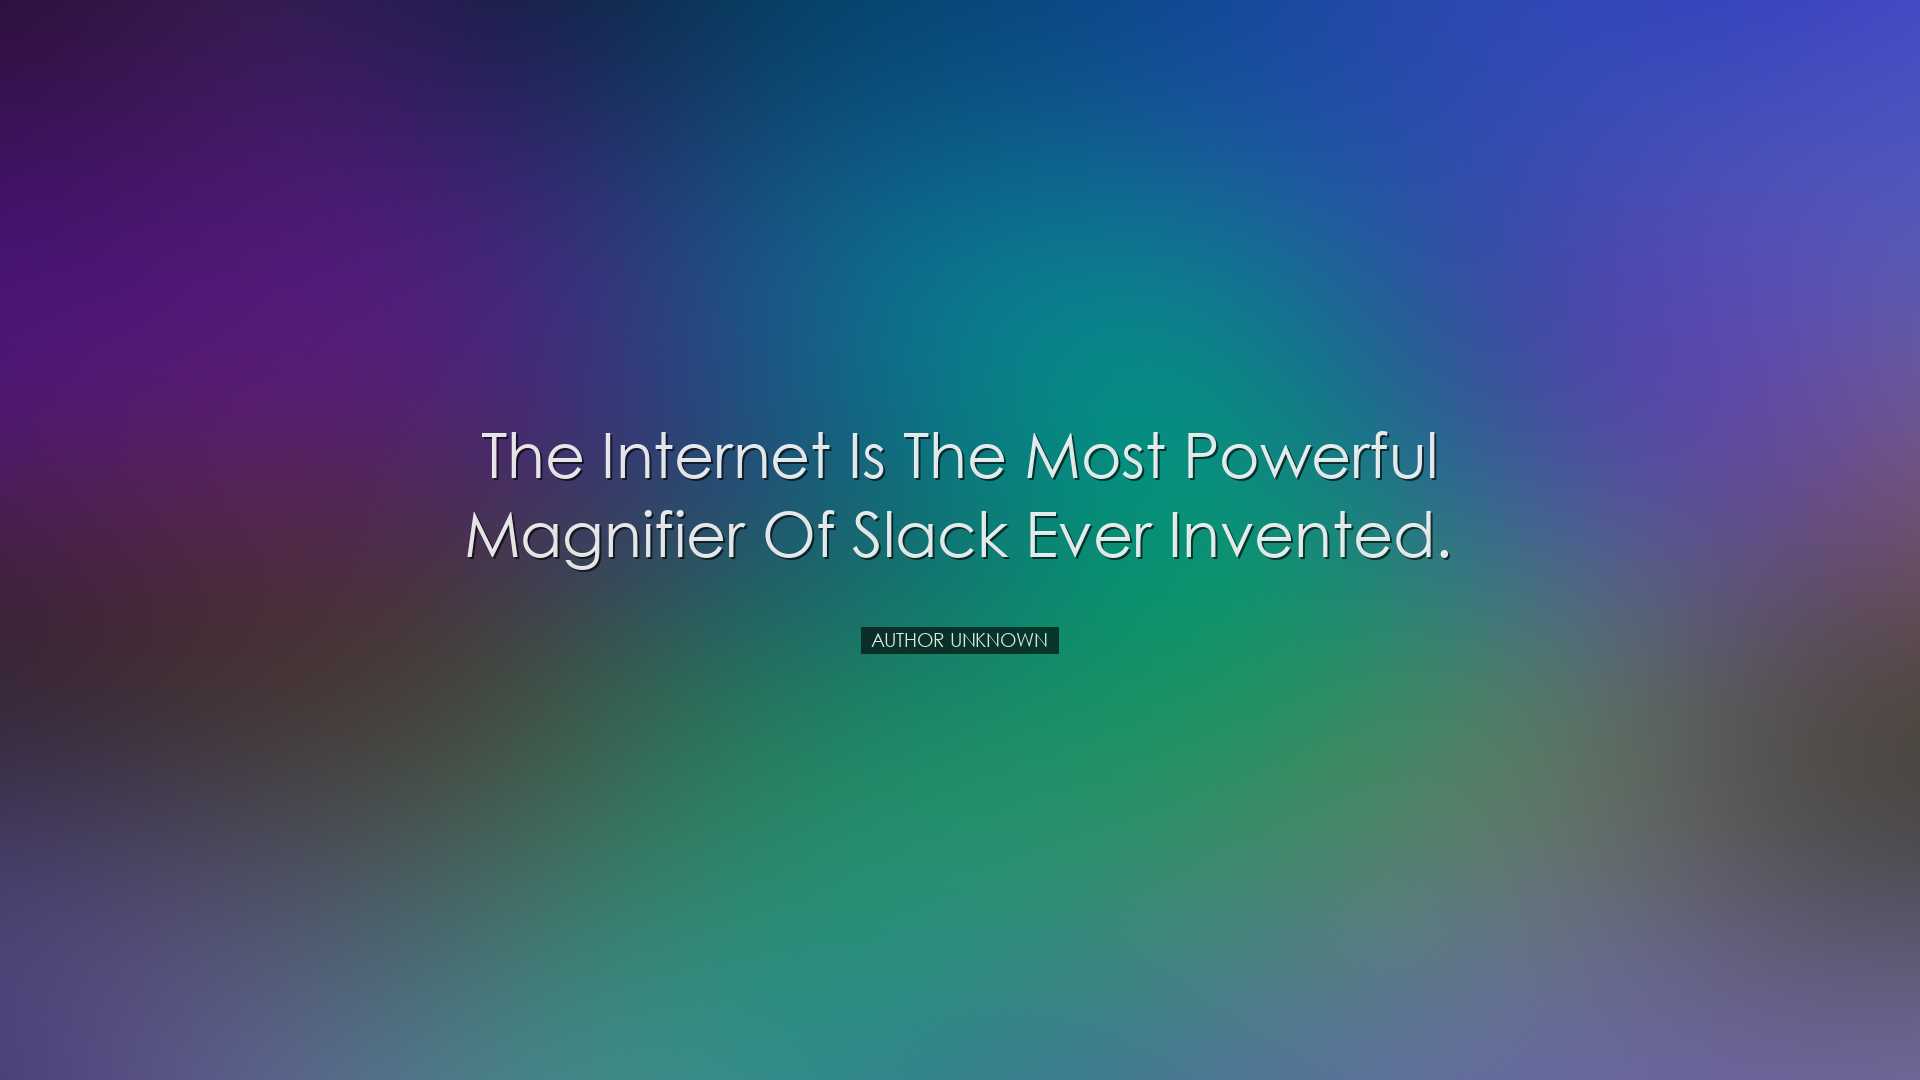 The Internet is the most powerful magnifier of slack ever invented